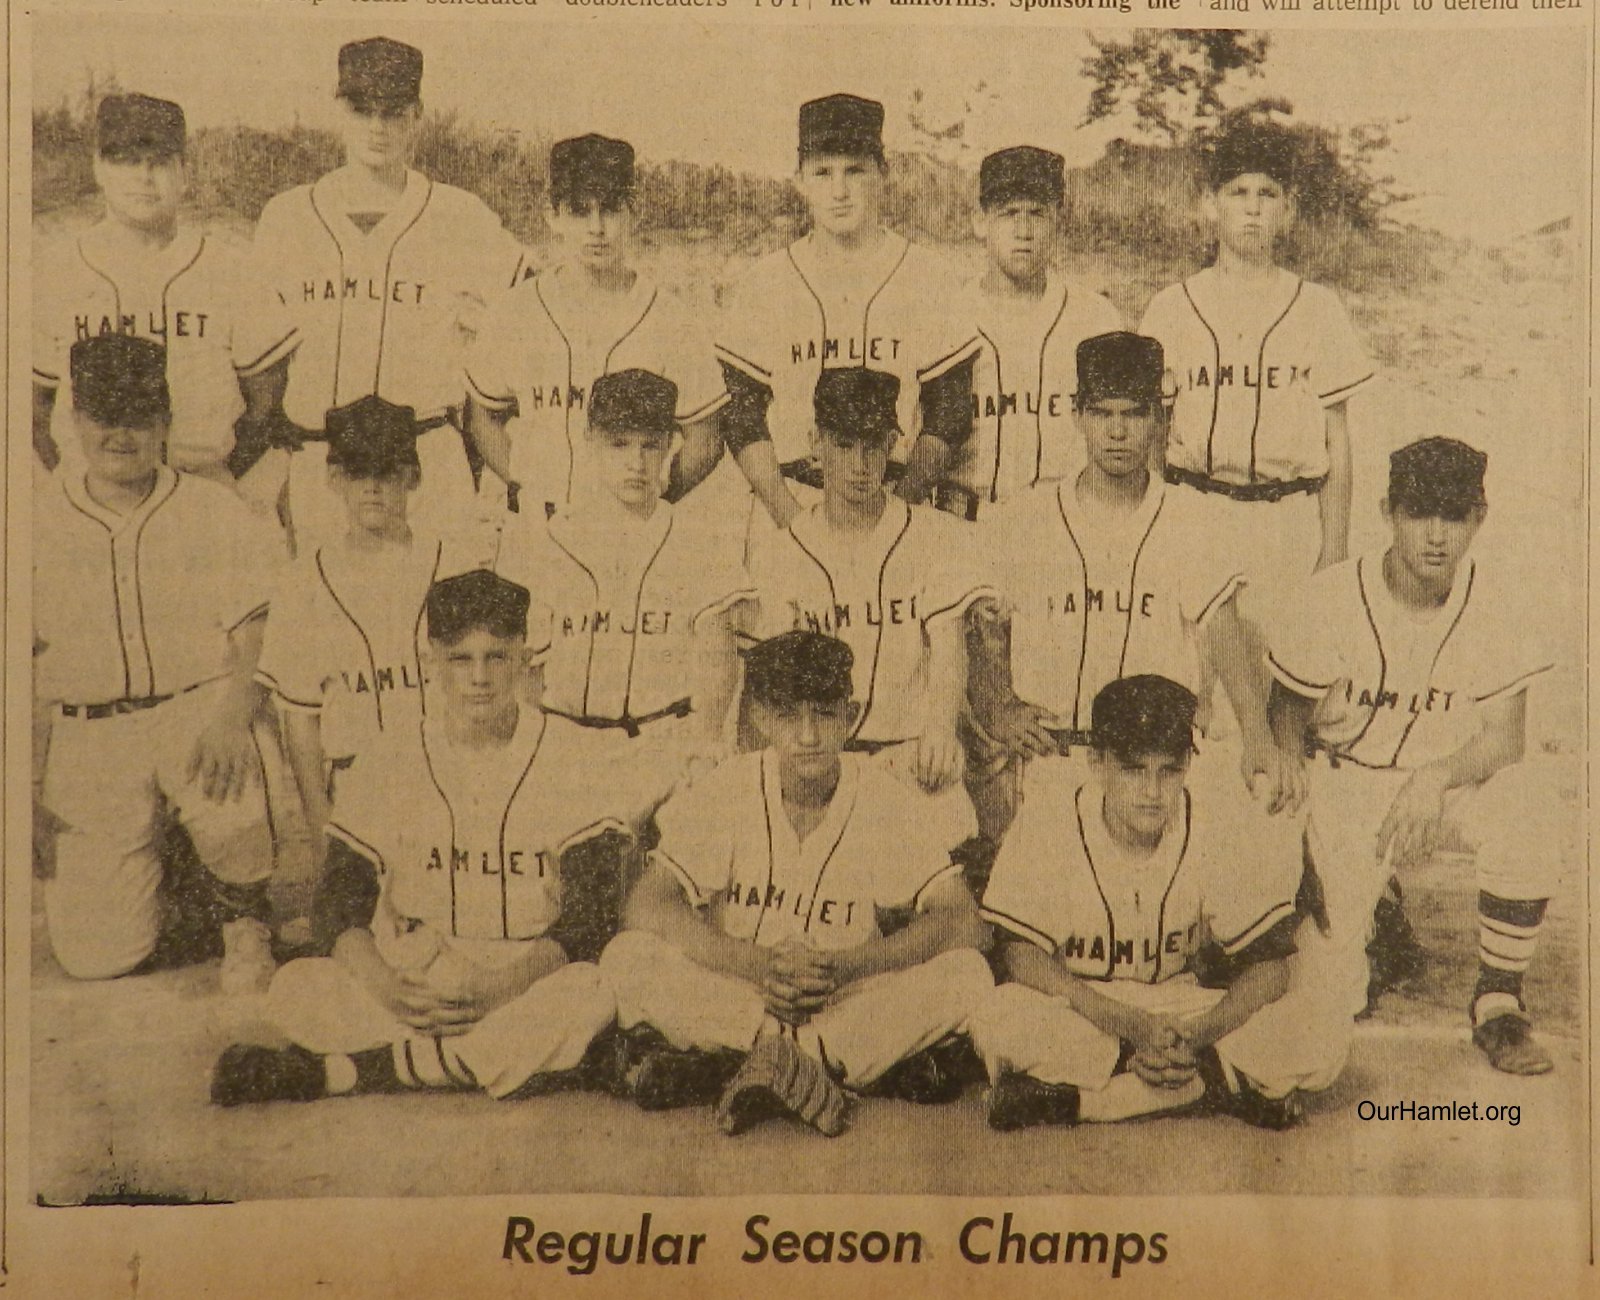 1965 Babe Ruth Champs OH.jpg